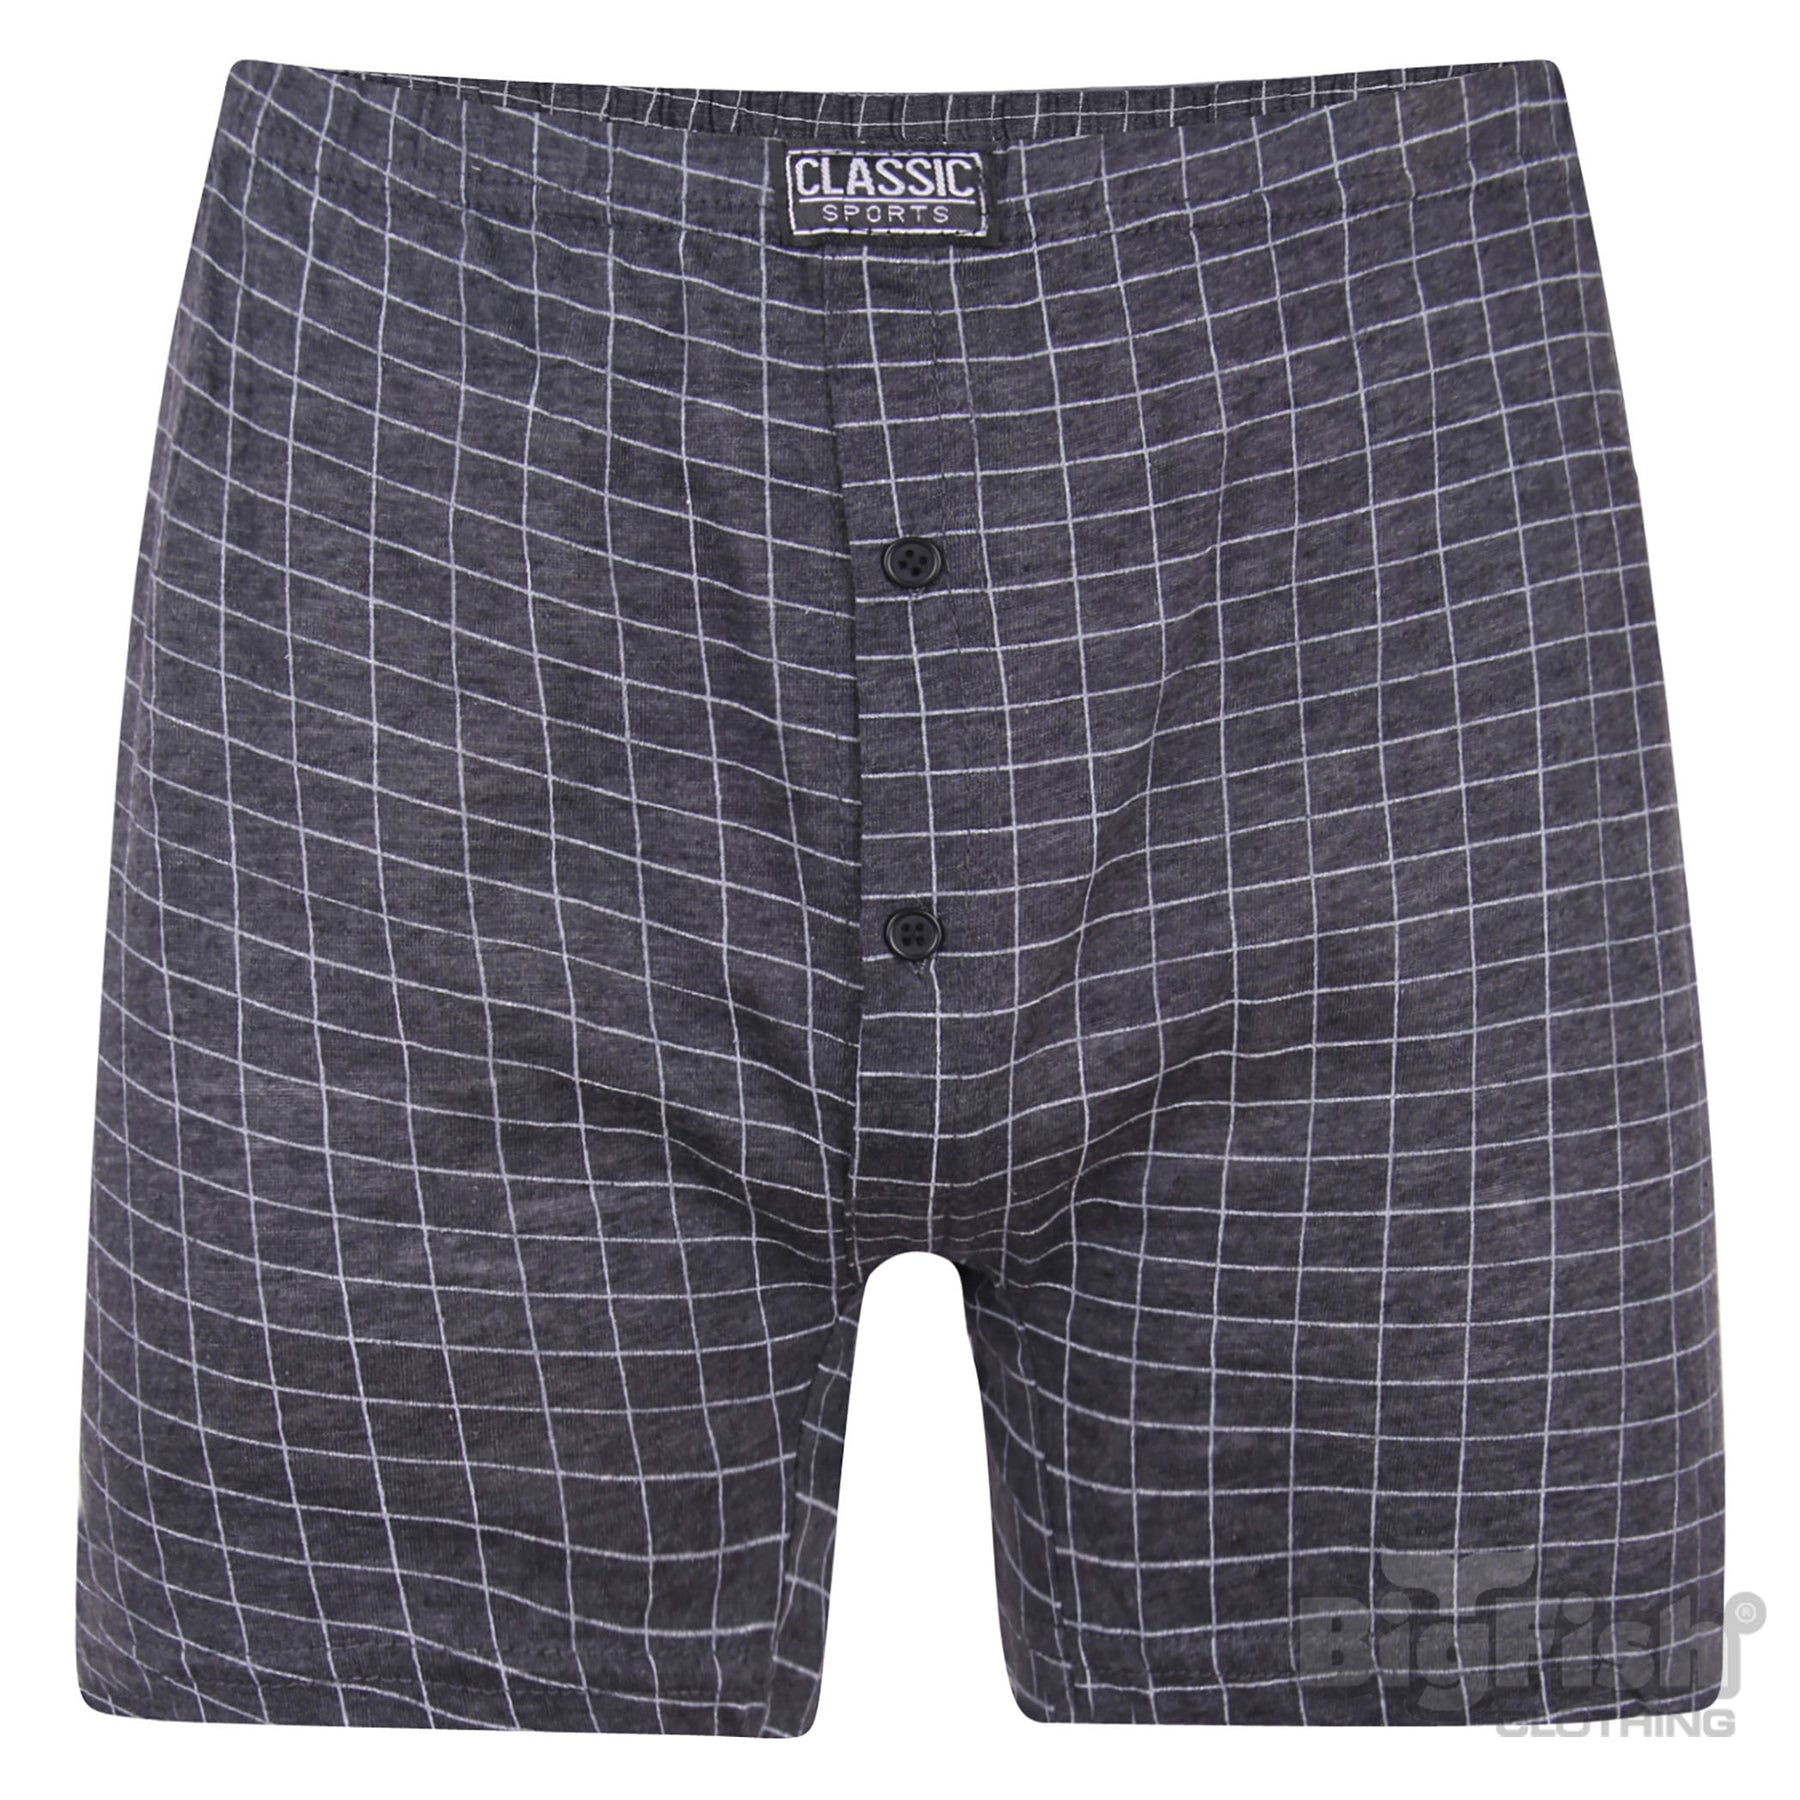 Classic Sports 3 Pack Boxers